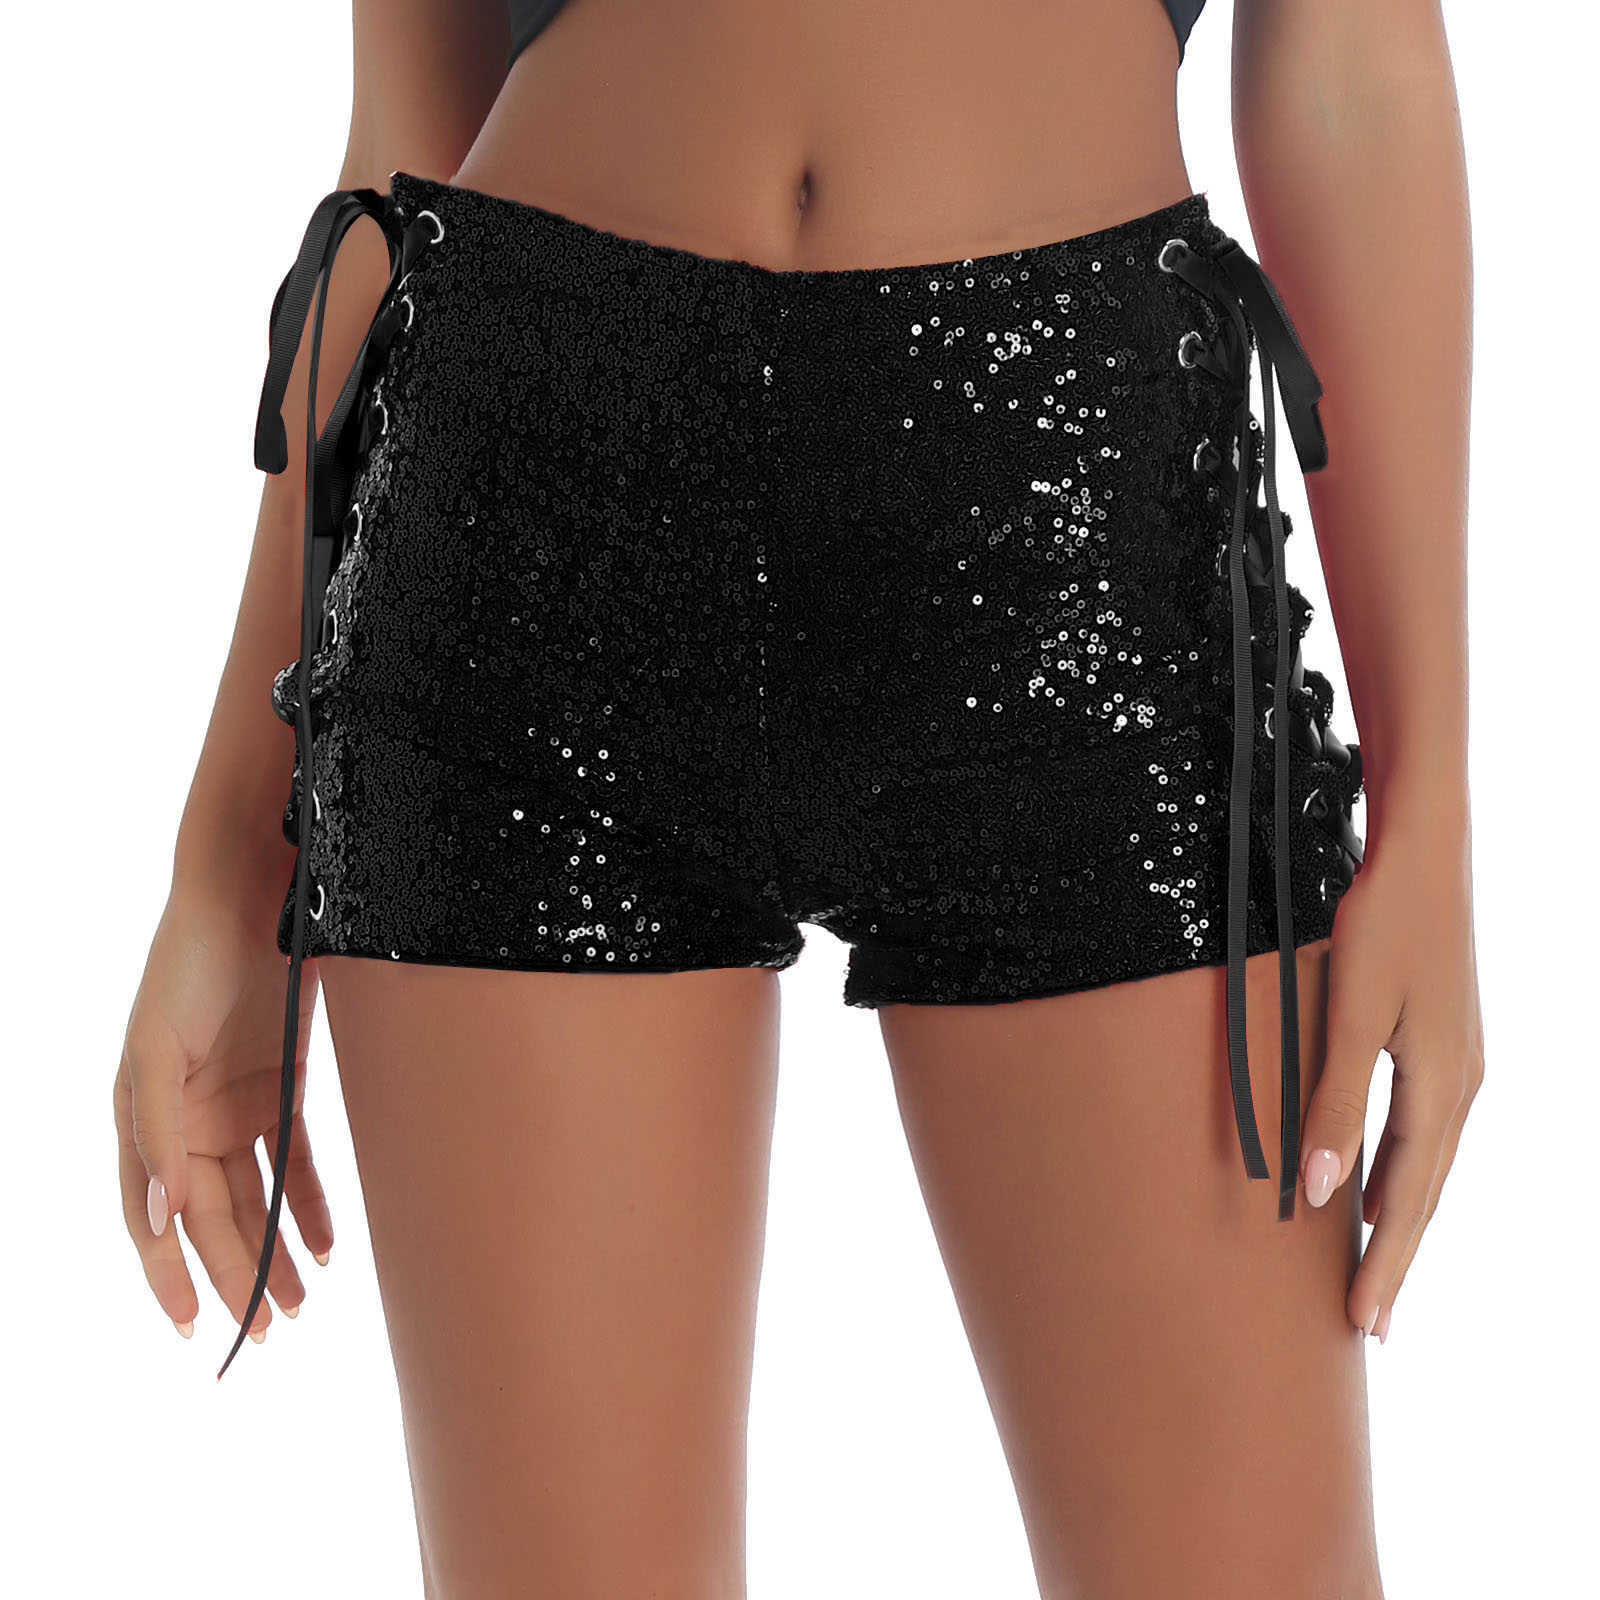 

Women Glitter Sequins Side Lace-Up Hot Sexy Mini Shorts Nightclub Party Festival Rave Pole Dancing Stage Performance Costume X0715, Black